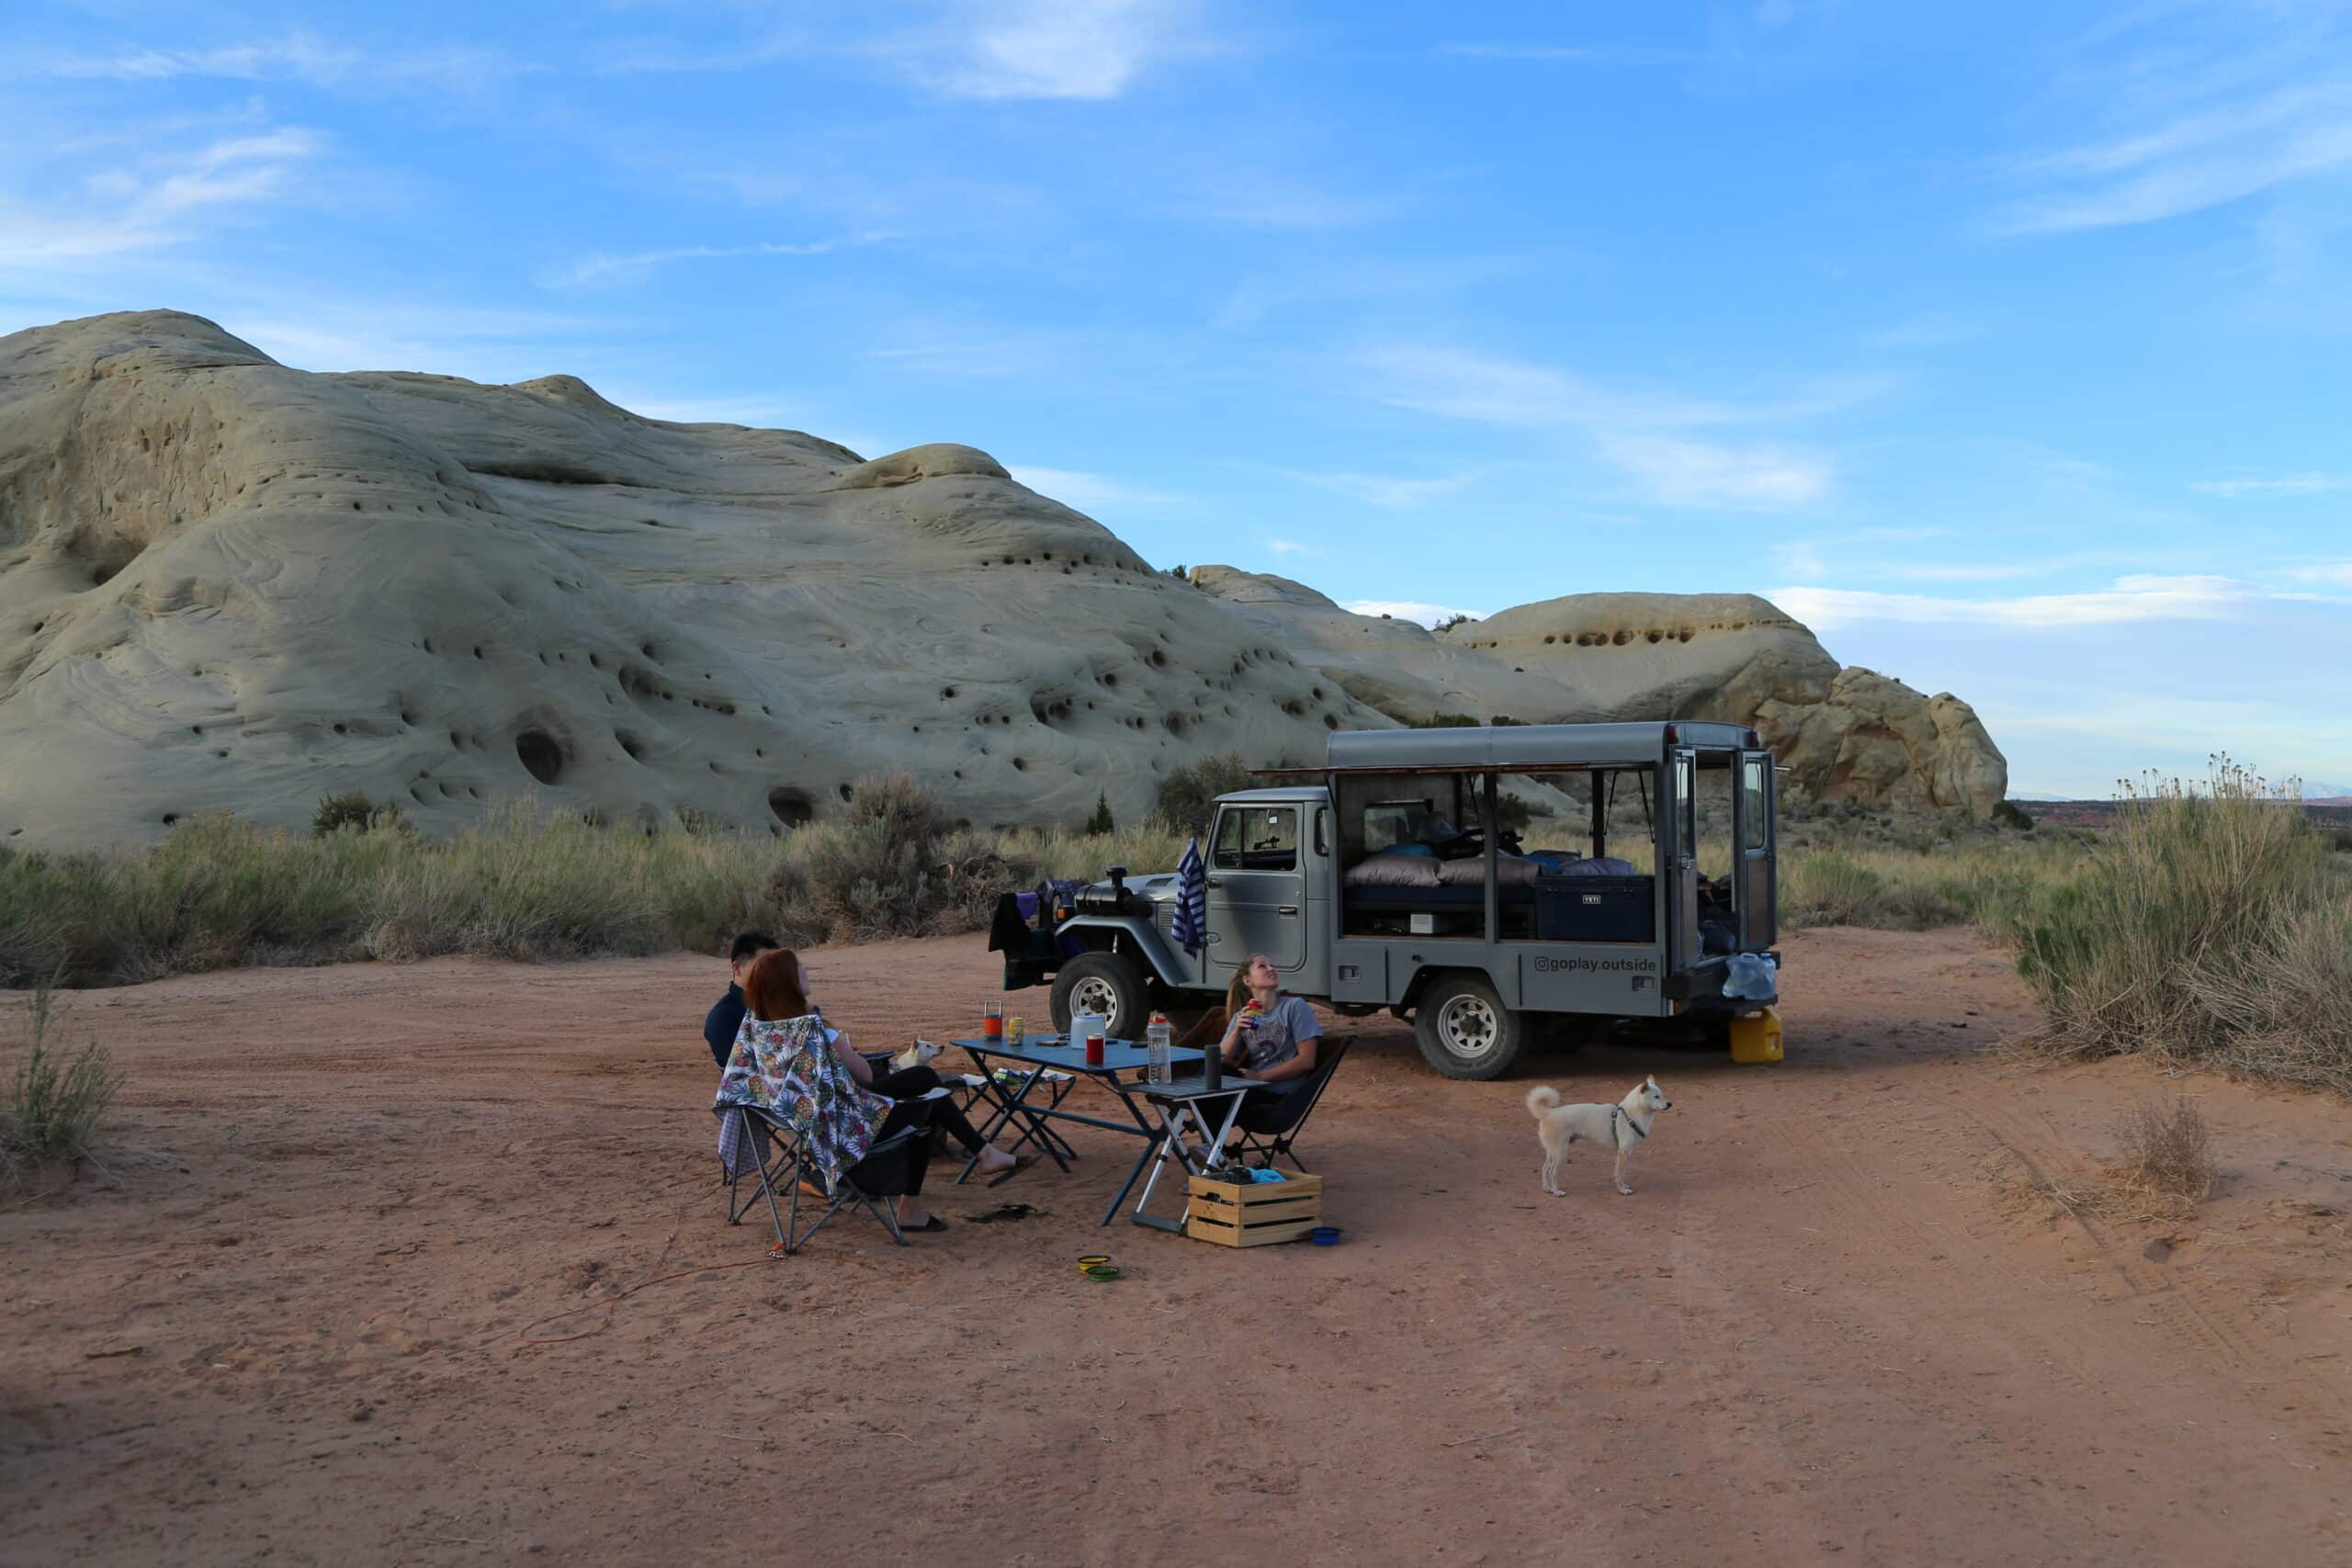 Go Play Outside and friends camping with their Land Cruiser